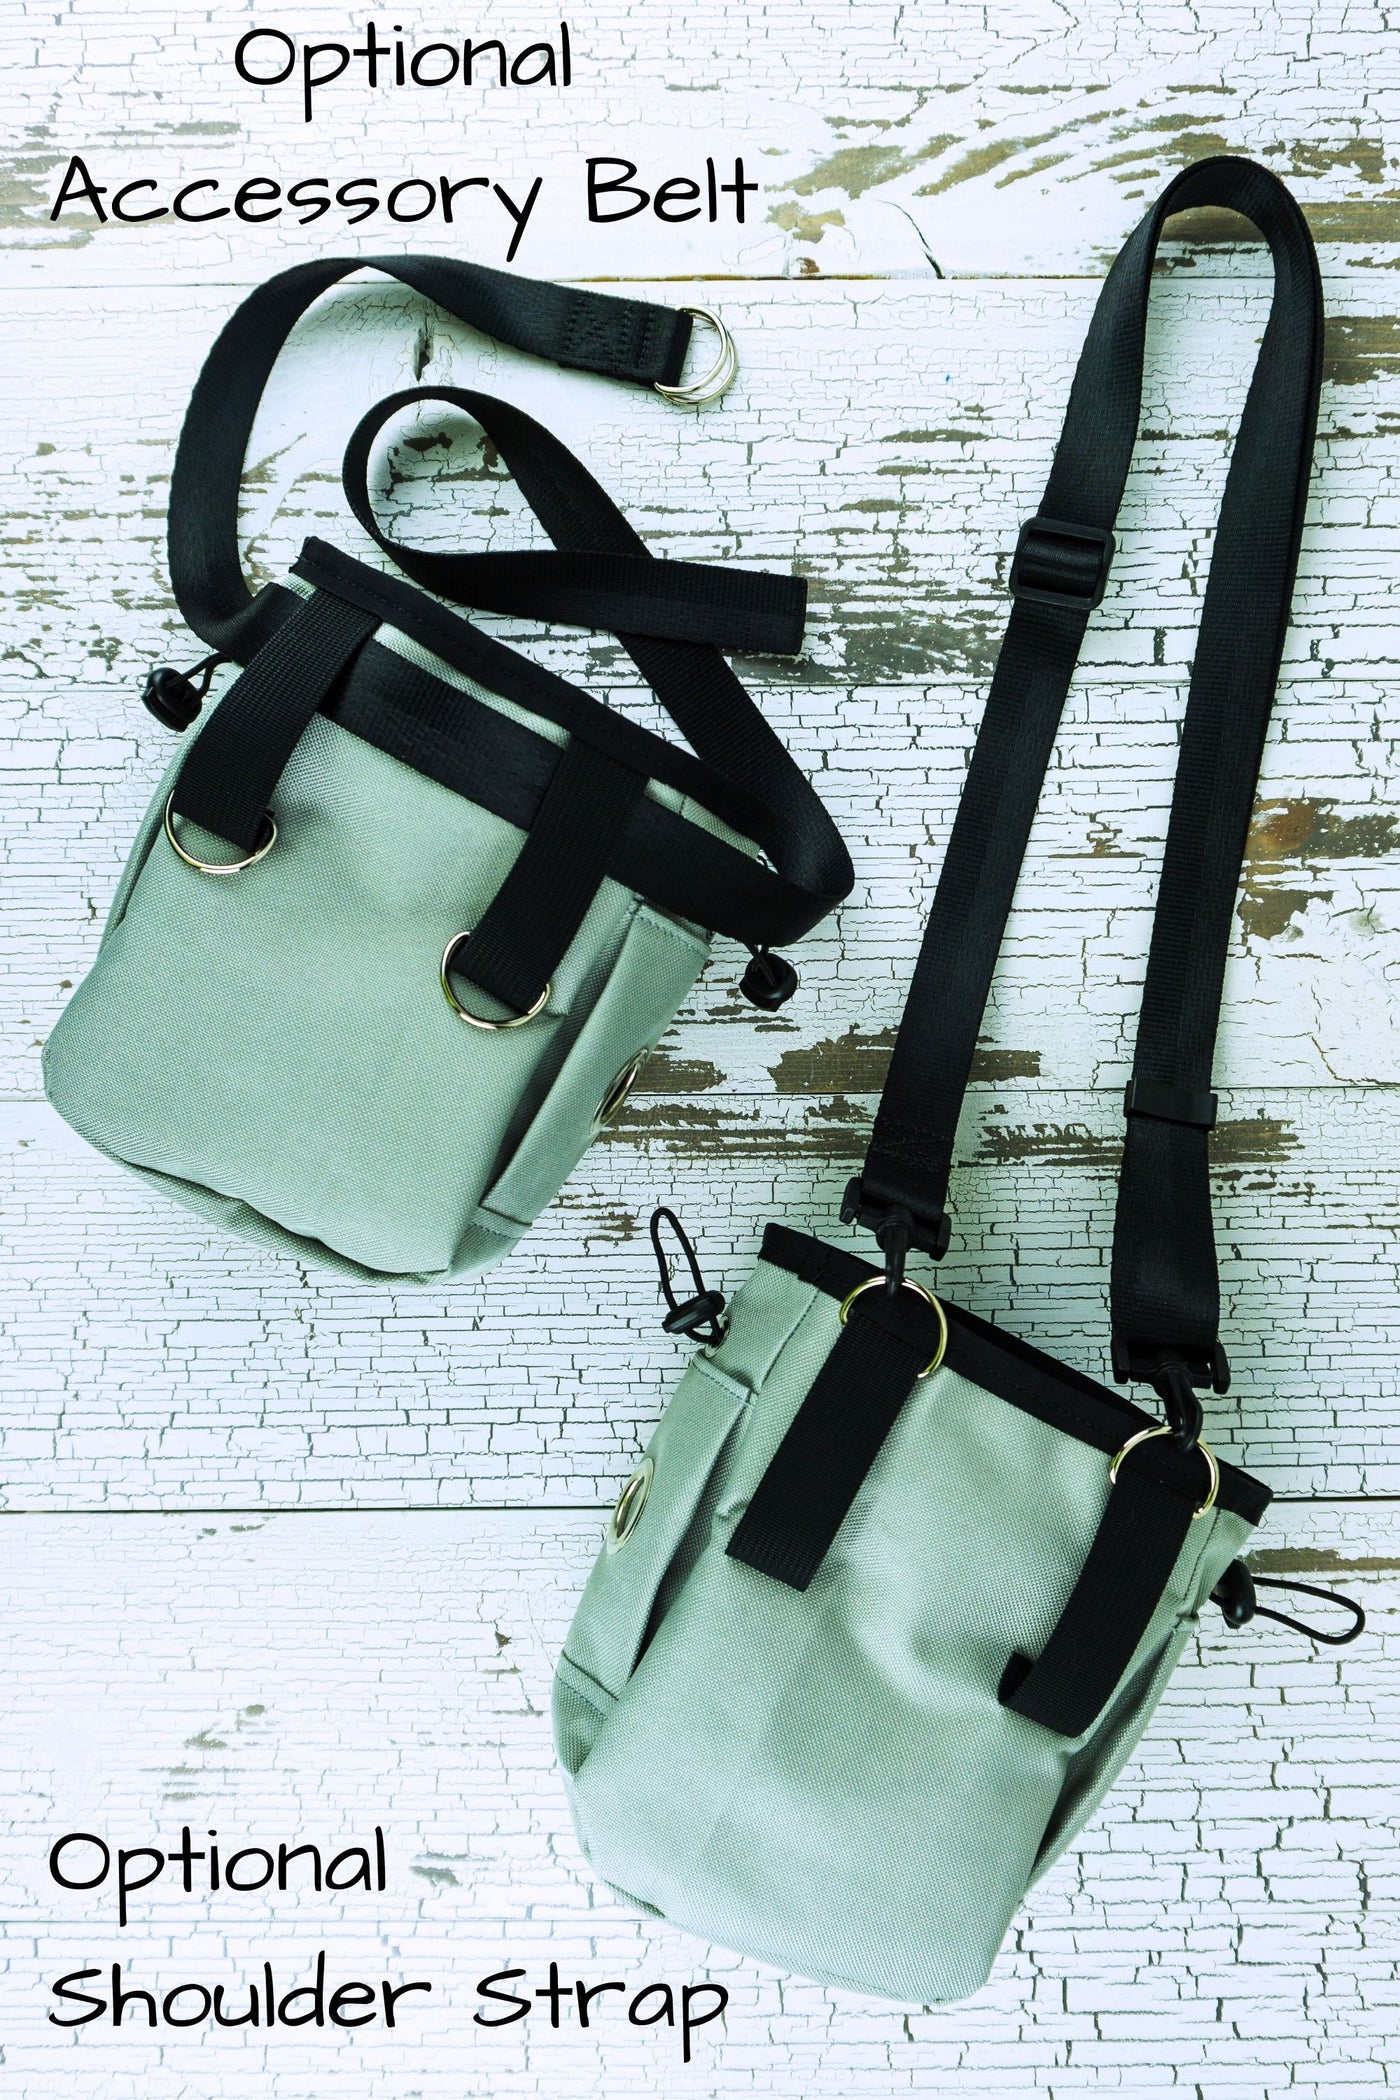 This training bag is designed to be worn on a hands free leash belt, but you may also purchase an optional accessory belt or a shoulder strap if you prefer one of those options. The accessory belt feeds through the two belt loops at the back of the treat pouch, while the shoulder strap clips onto two d rings on these belt loops.